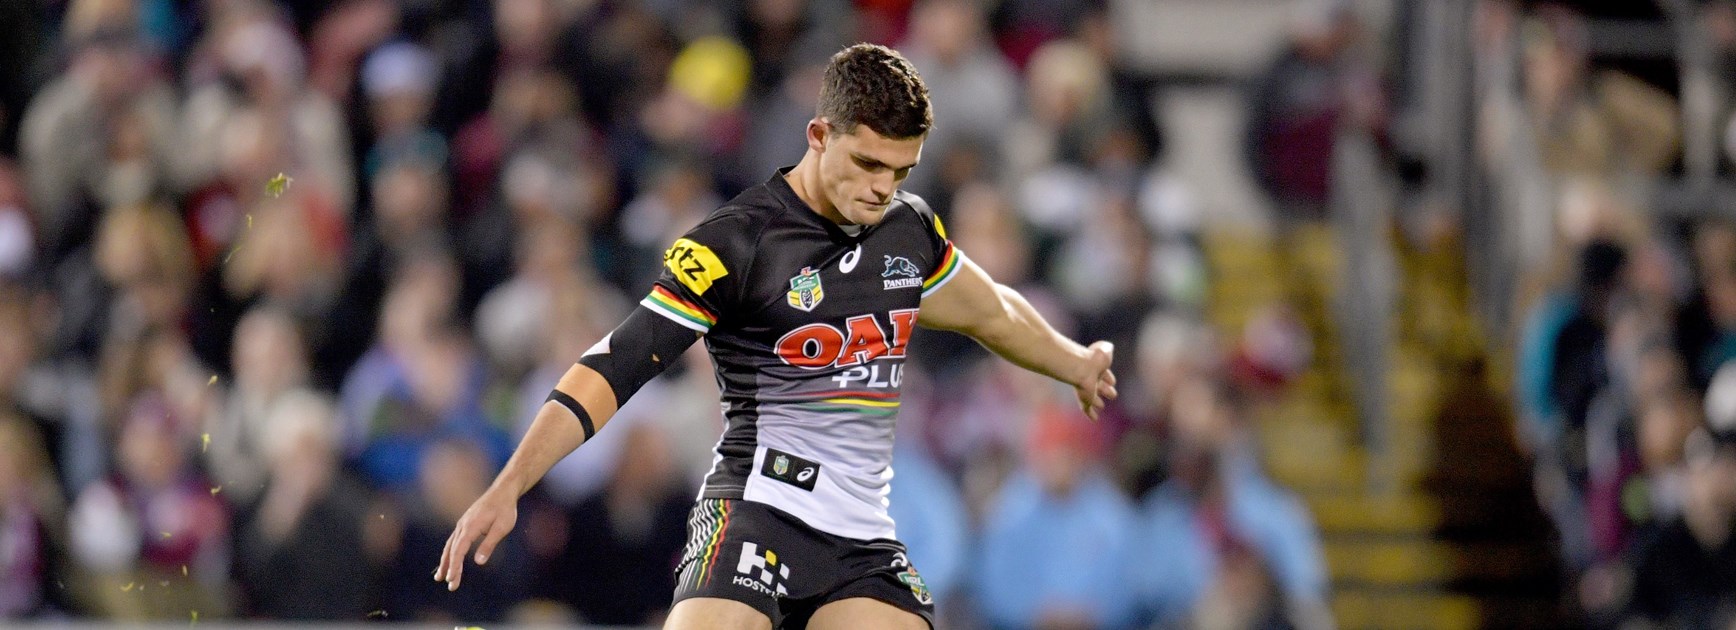 Panthers goal-kicker Nathan Cleary.